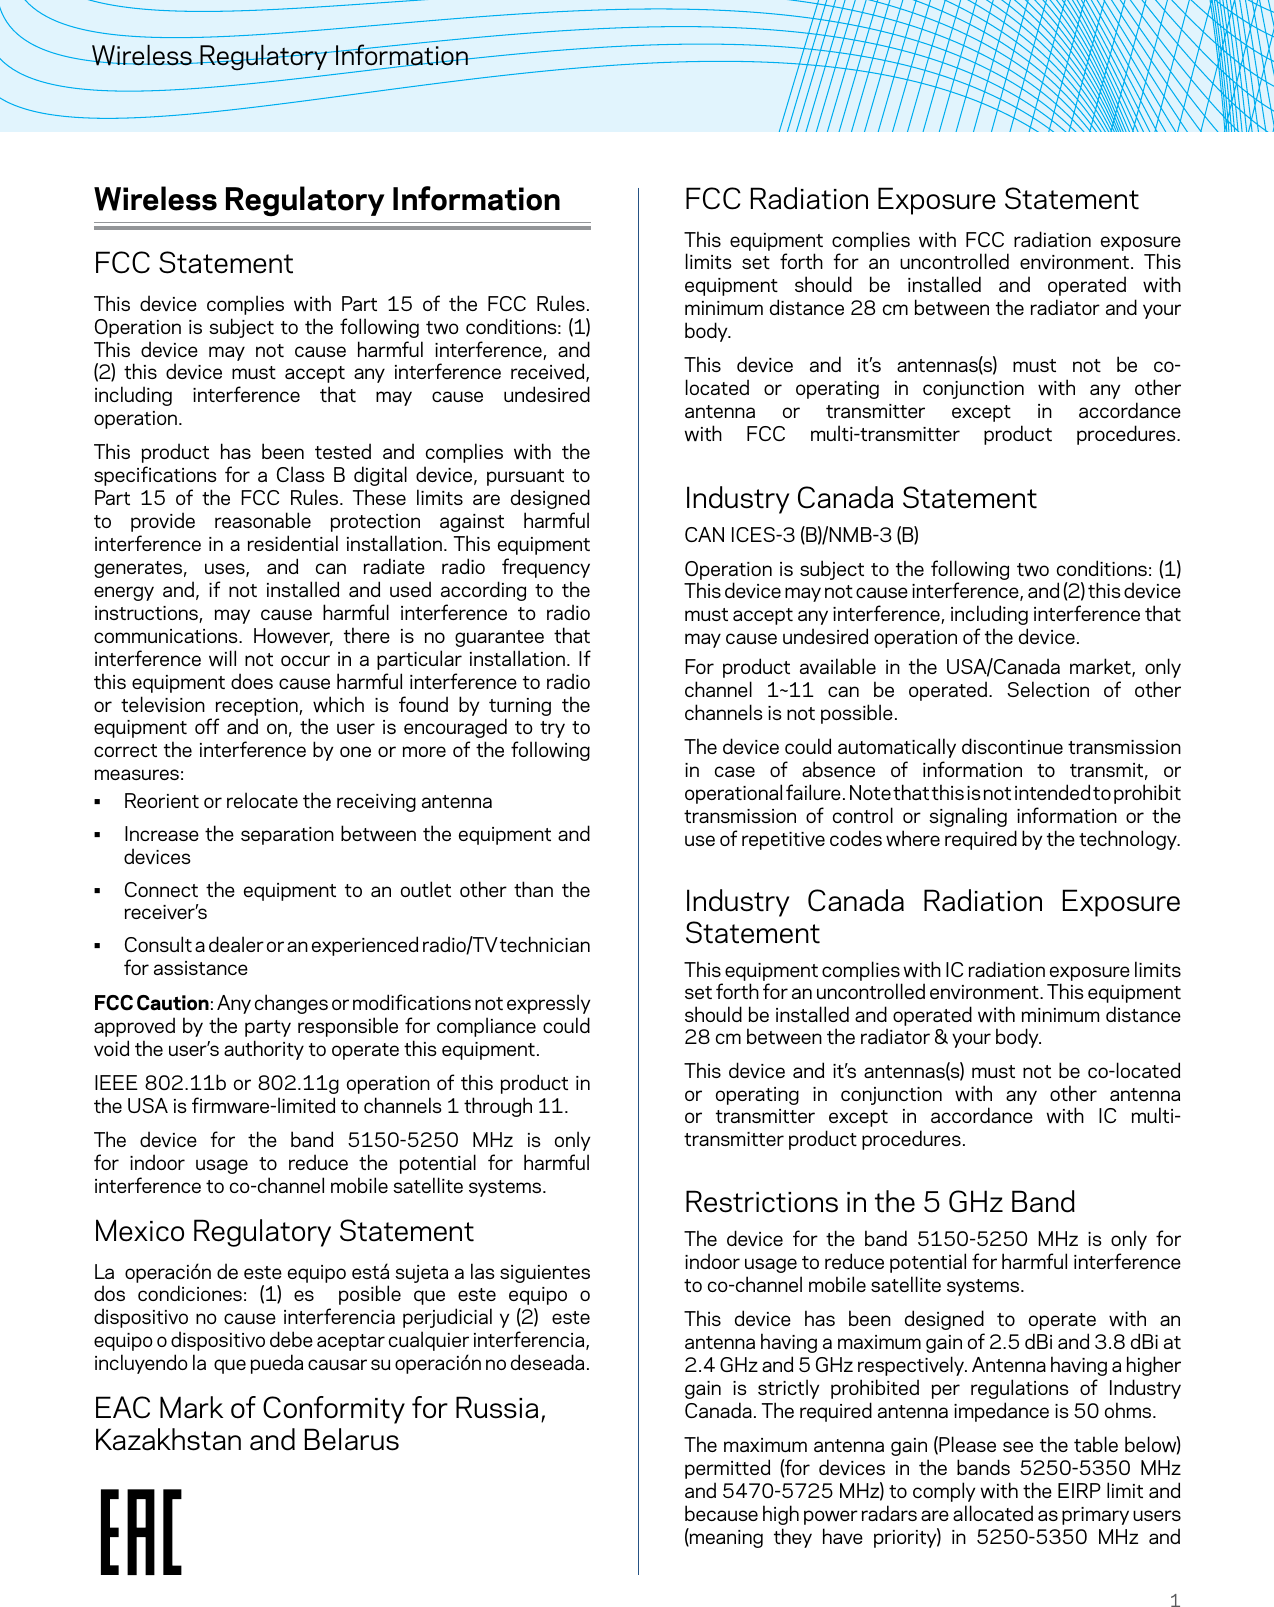 1Wireless Regulatory InformationWireless Regulatory InformationFCC StatementThis device complies with Part 15 of the FCC Rules. Operation is subject to the following two conditions: (1) This device may not cause harmful interference, and (2) this device must accept any interference received, including interference that may cause undesired operation.This product has been tested and complies with the specifications for a Class B digital device, pursuant to Part 15 of the FCC Rules. These limits are designed to provide reasonable protection against harmful interference in a residential installation. This equipment generates, uses, and can radiate radio frequency energy and, if not installed and used according to the instructions, may cause harmful interference to radio communications. However, there is no guarantee that interference will not occur in a particular installation. If this equipment does cause harmful interference to radio or television reception, which is found by turning the equipment off and on, the user is encouraged to try to correct the interference by one or more of the following measures: • Reorient or relocate the receiving antenna • Increase the separation between the equipment and devices • Connect the equipment to an outlet other than the receiver’s • Consult a dealer or an experienced radio/TV technician for assistanceFCC Caution: Any changes or modifications not expressly approved by the party responsible for compliance could void the user’s authority to operate this equipment.IEEE 802.11b or 802.11g operation of this product in the USA is firmware-limited to channels 1 through 11.The device for the band 5150-5250 MHz is only for indoor usage to reduce the potential for harmful interference to co-channel mobile satellite systems.Mexico Regulatory StatementLa  operación de este equipo está sujeta a las siguientes dos condiciones: (1) es  posible que este equipo o dispositivo no cause interferencia perjudicial y (2)  este equipo o dispositivo debe aceptar cualquier interferencia, incluyendo la  que pueda causar su operación no deseada.EAC Mark of Conformity for Russia, Kazakhstan and BelarusFCC Radiation Exposure StatementThis equipment complies with FCC radiation exposure limits set forth for an uncontrolled environment. This equipment should be installed and operated with minimum distance 28 cm between the radiator and your body.This device and it’s antennas(s) must not be co-located or operating in conjunction with any other antenna or transmitter except in accordance with FCC multi-transmitter product procedures.  Industry Canada StatementCAN ICES-3 (B)/NMB-3 (B)Operation is subject to the following two conditions: (1) This device may not cause interference, and (2) this device must accept any interference, including interference that may cause undesired operation of the device.For product available in the USA/Canada market, only channel 1~11 can be operated. Selection of other channels is not possible.The device could automatically discontinue transmission in case of absence of information to transmit, or operational failure. Note that this is not intended to prohibit transmission of control or signaling information or the use of repetitive codes where required by the technology.  Industry Canada Radiation Exposure StatementThis equipment complies with IC radiation exposure limits set forth for an uncontrolled environment. This equipment should be installed and operated with minimum distance 28 cm between the radiator &amp; your body.This device and it’s antennas(s) must not be co-located or operating in conjunction with any other antenna or transmitter except in accordance with IC multi-transmitter product procedures. Restrictions in the 5 GHz BandThe device for the band 5150-5250 MHz is only for indoor usage to reduce potential for harmful interference to co-channel mobile satellite systems.This device has been designed to operate with an antenna having a maximum gain of 2.5 dBi and 3.8 dBi at  2.4 GHz and 5 GHz respectively. Antenna having a higher gain is strictly prohibited per regulations of Industry Canada. The required antenna impedance is 50 ohms.The maximum antenna gain (Please see the table below) permitted (for devices in the bands 5250-5350 MHz and 5470-5725 MHz) to comply with the EIRP limit and because high power radars are allocated as primary users (meaning they have priority) in 5250-5350 MHz and 